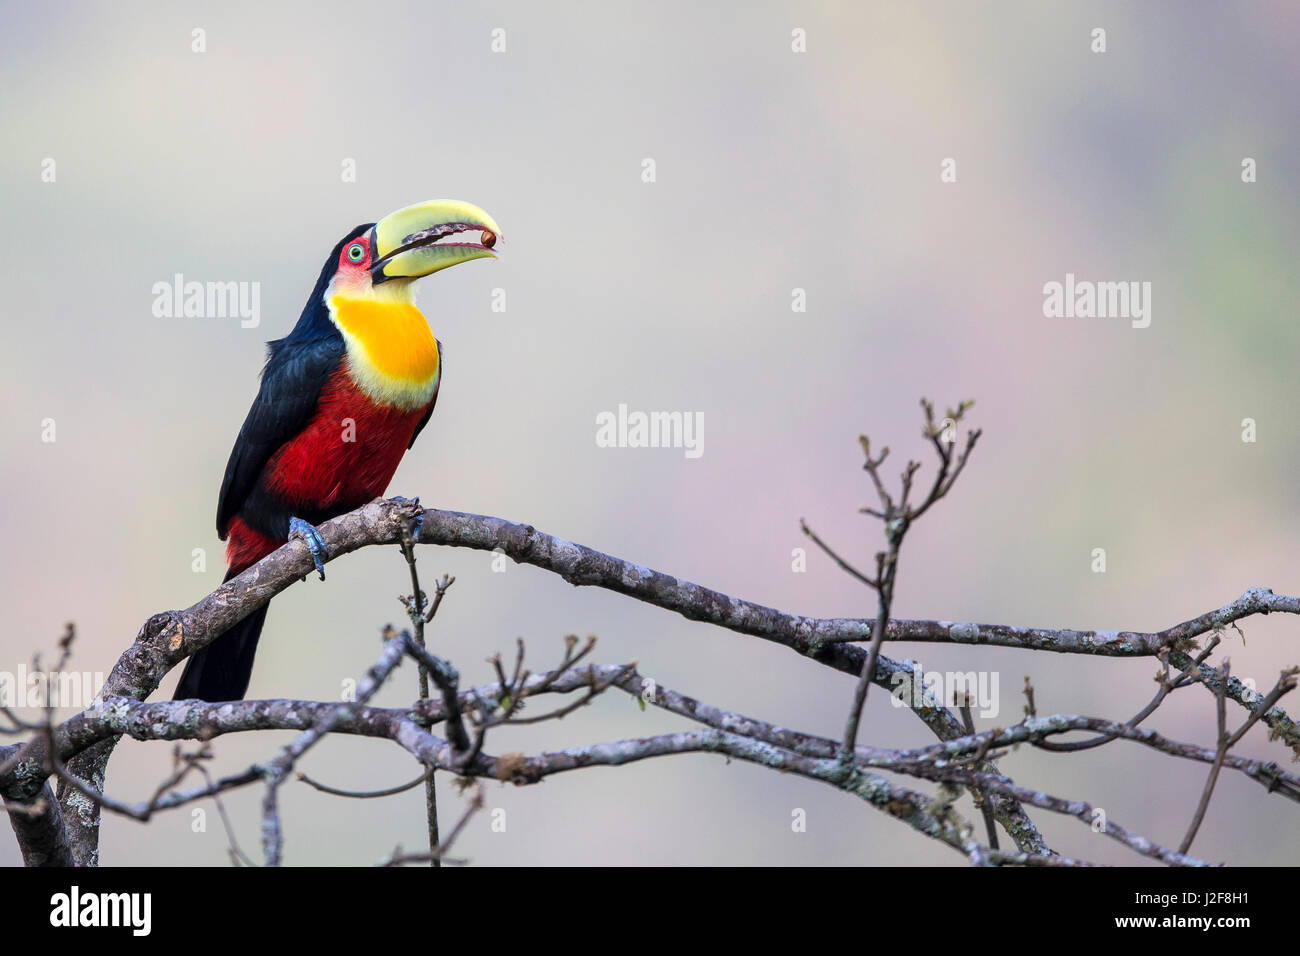 Green-billed toucan (Ramphastos dicolorus) holding berry in its bill Stock Photo